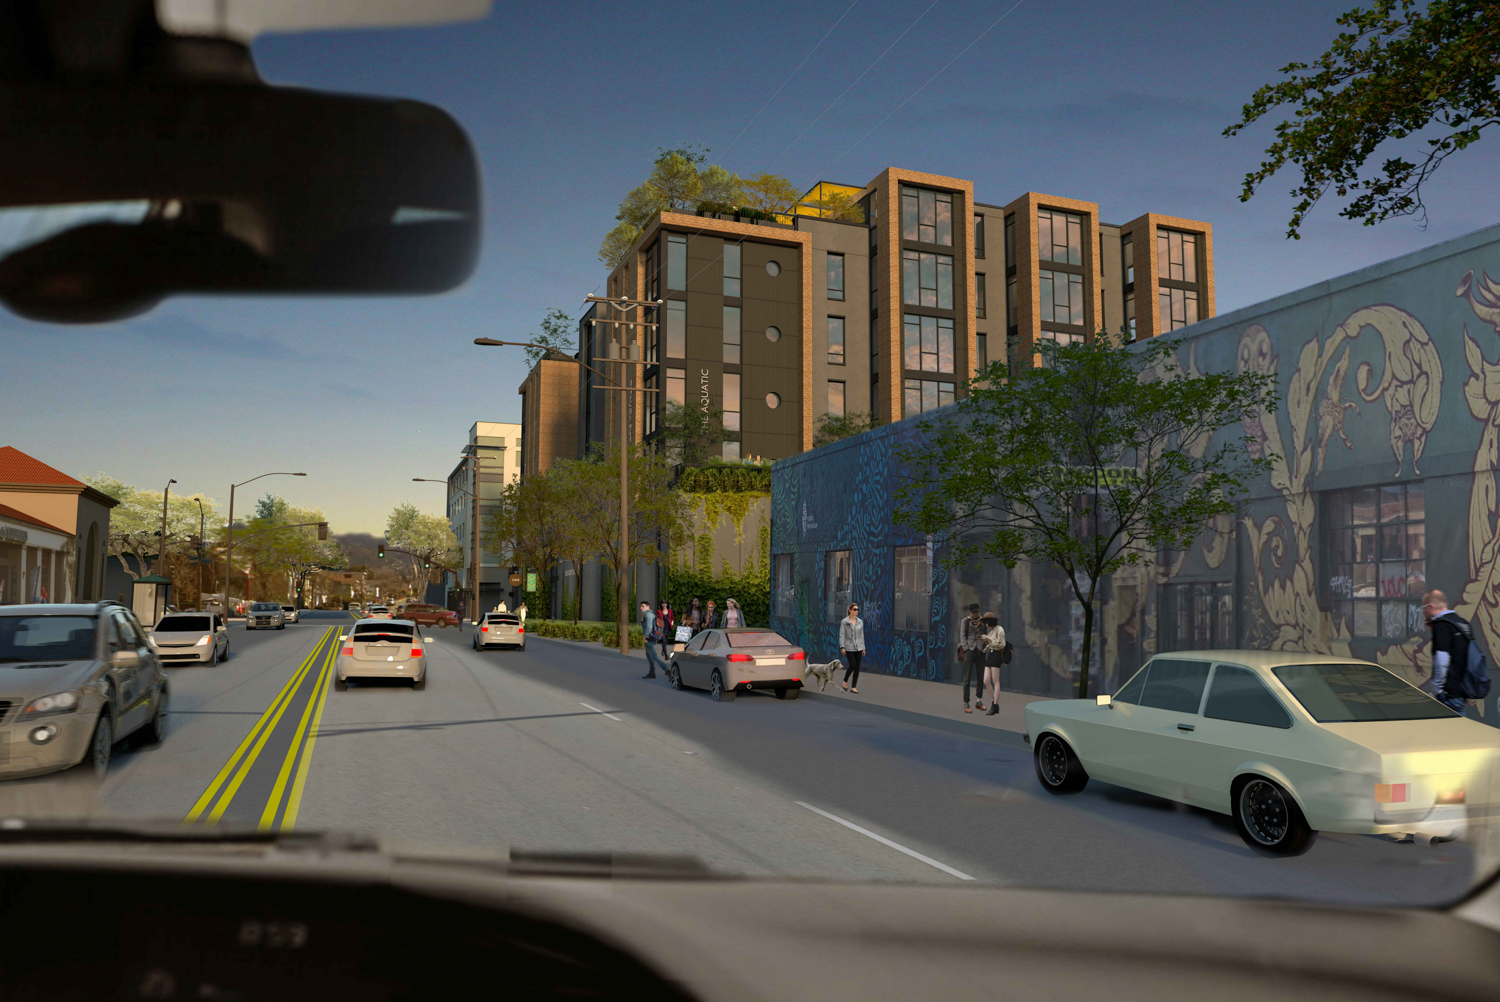 3000 San Pablo Avenue looking east down Ashby, rendering by Trachtenberg Architects